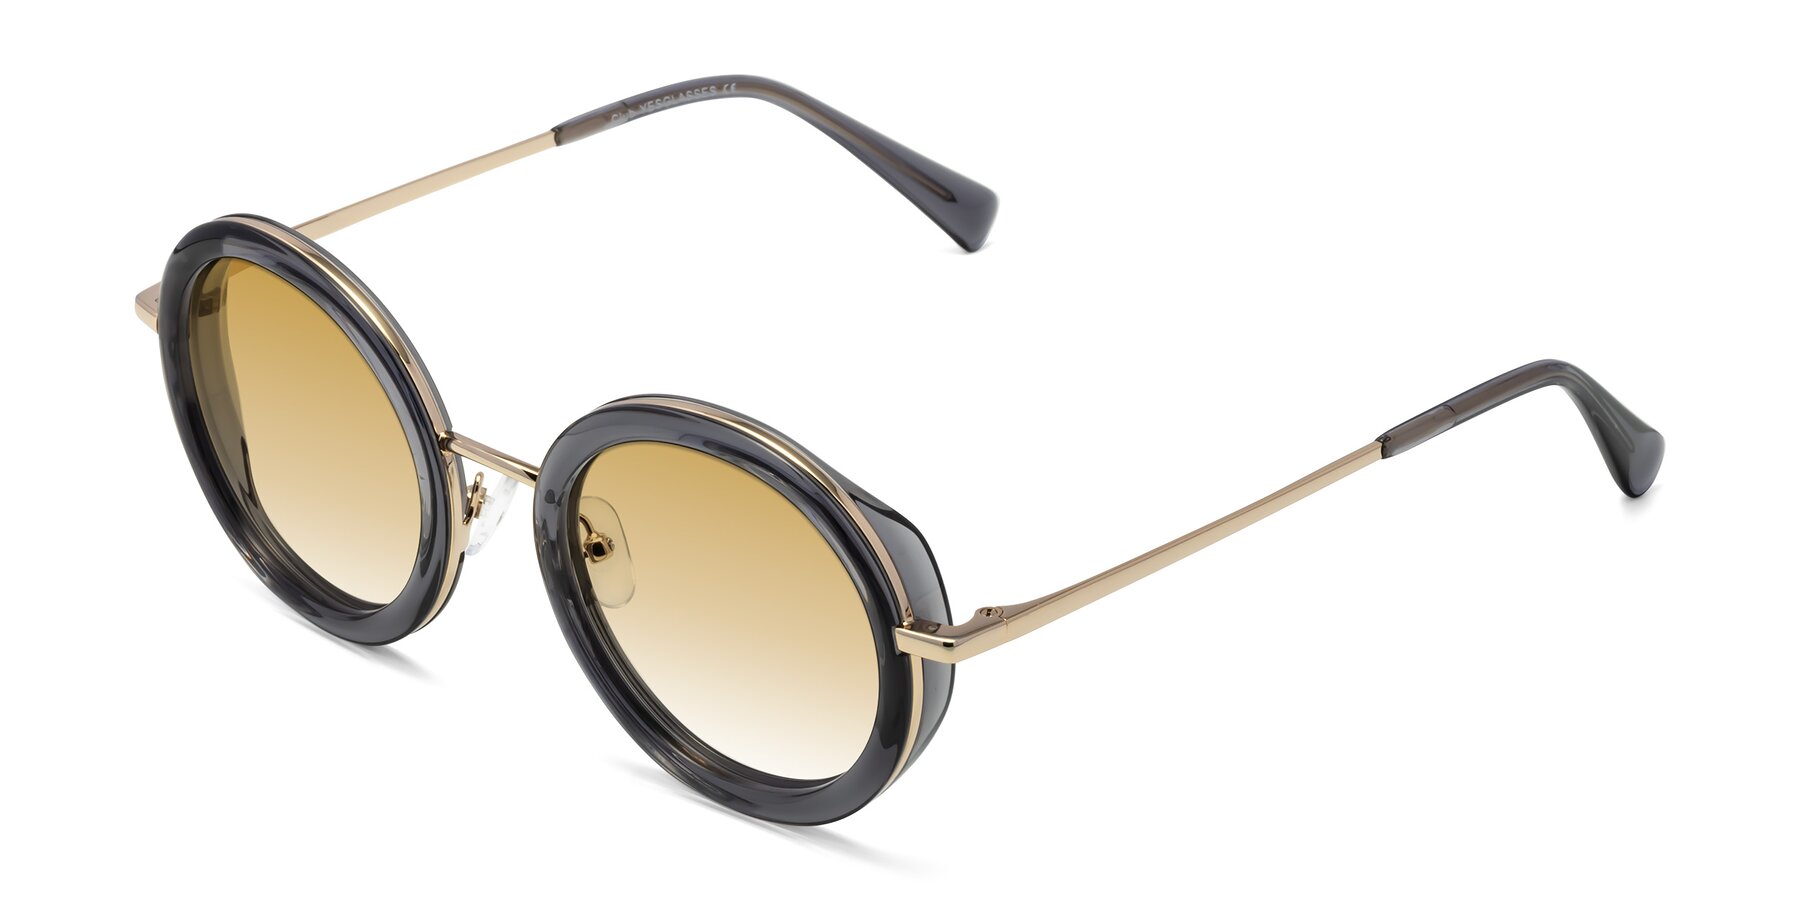 Angle of Club in Gray-Gold with Champagne Gradient Lenses